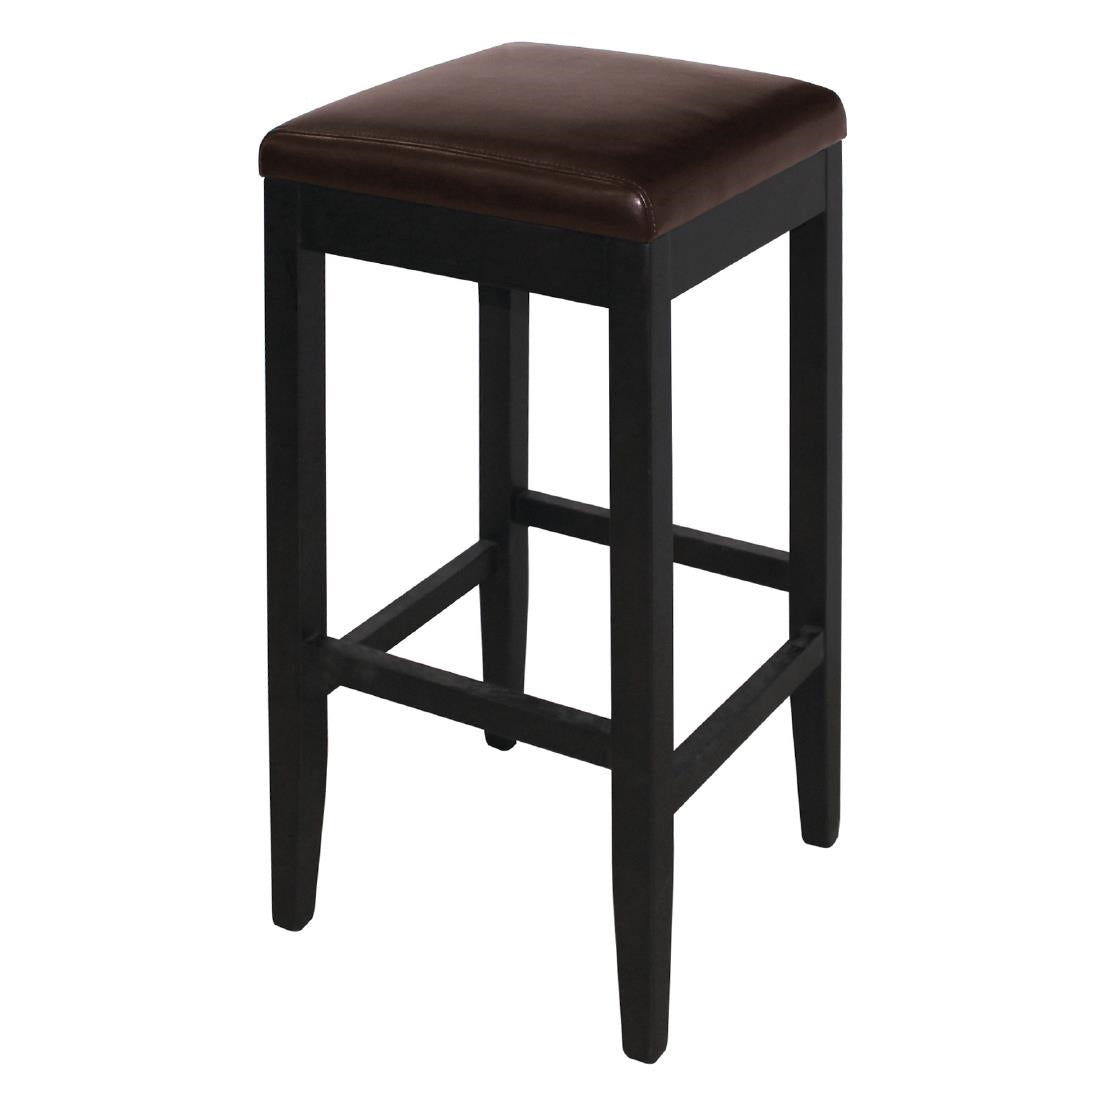 GG649 Bolero Faux Leather High Bar Stools Dark Brown (Pack of 2) JD Catering Equipment Solutions Ltd